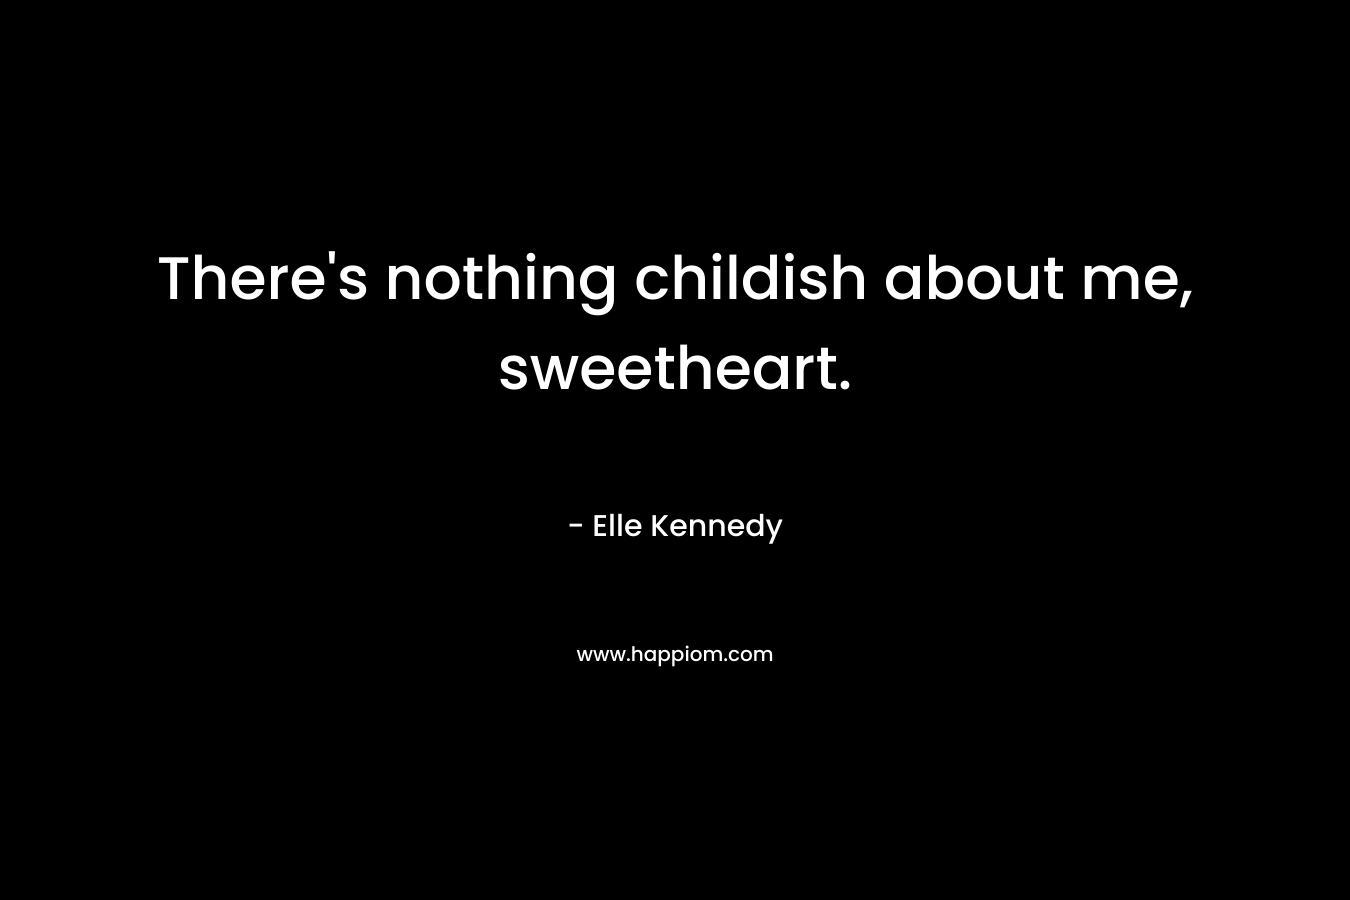 There’s nothing childish about me, sweetheart. – Elle Kennedy